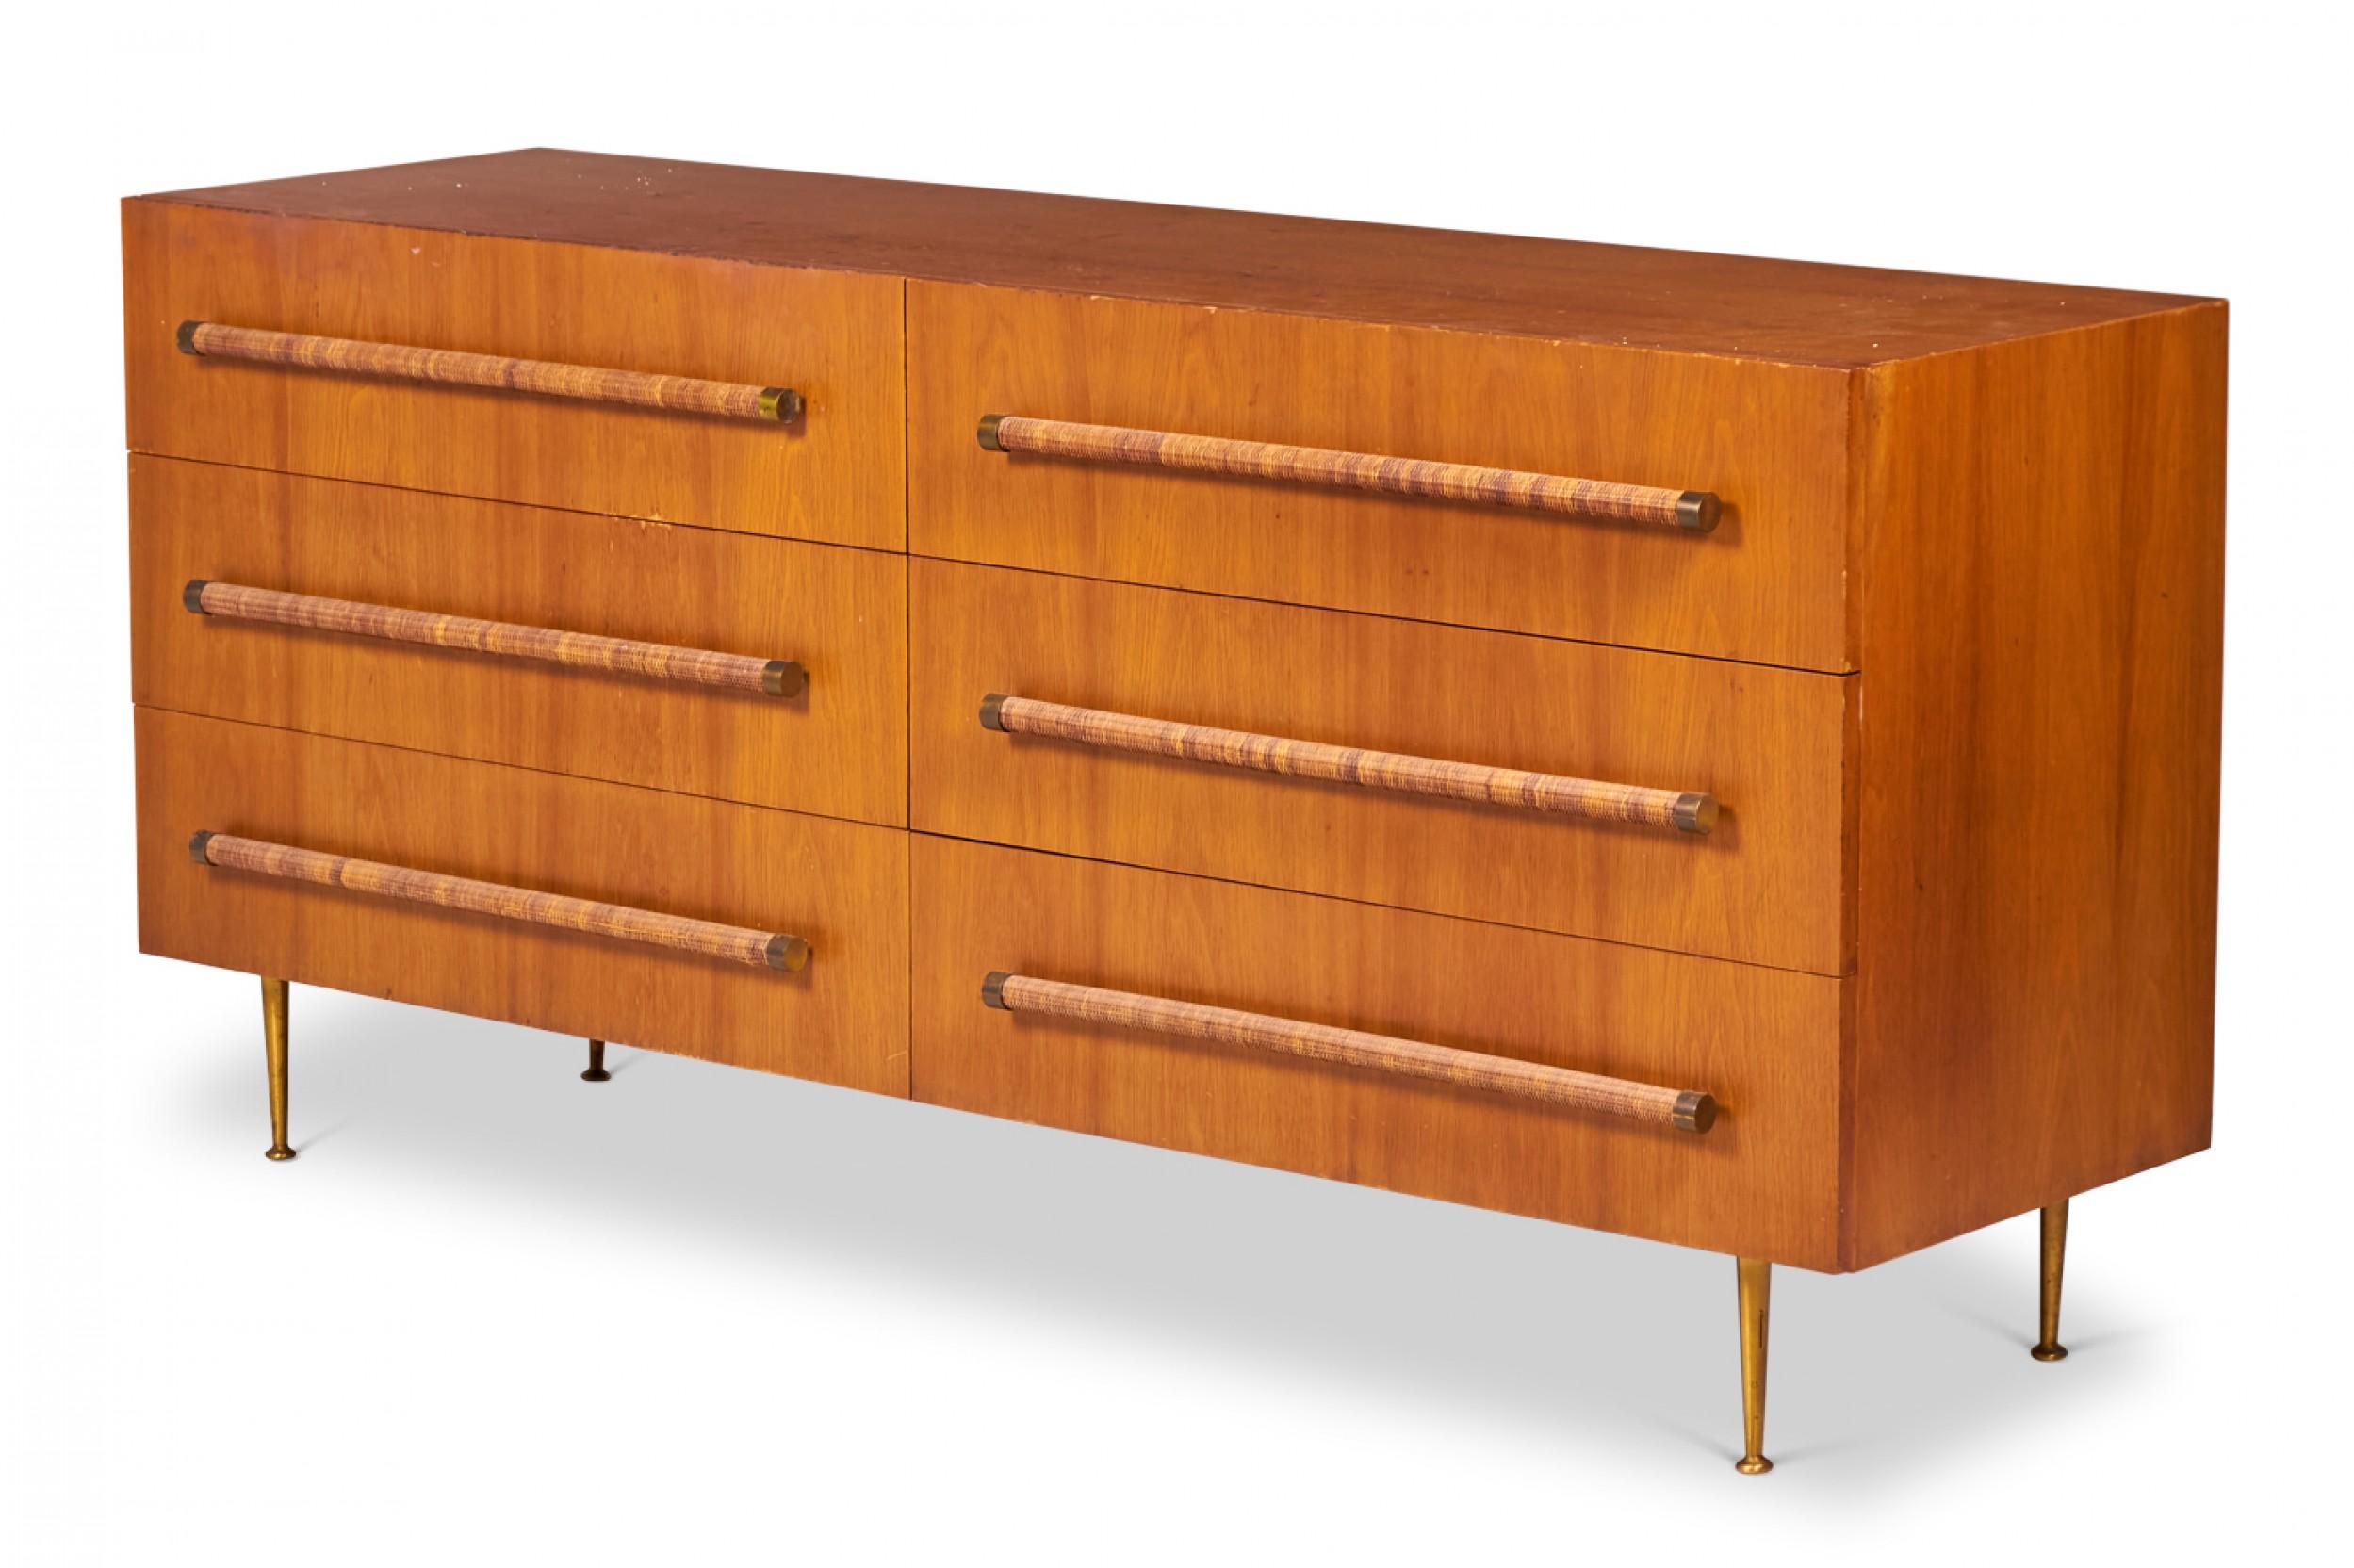 American mid-century (1950s) walnut six-drawer chest of drawers with rattan-wrapped dowel drawer pulls and four tapered brass legs with circular brass feet. (T.H. Robsjohn-gibbings for Widdicomb).